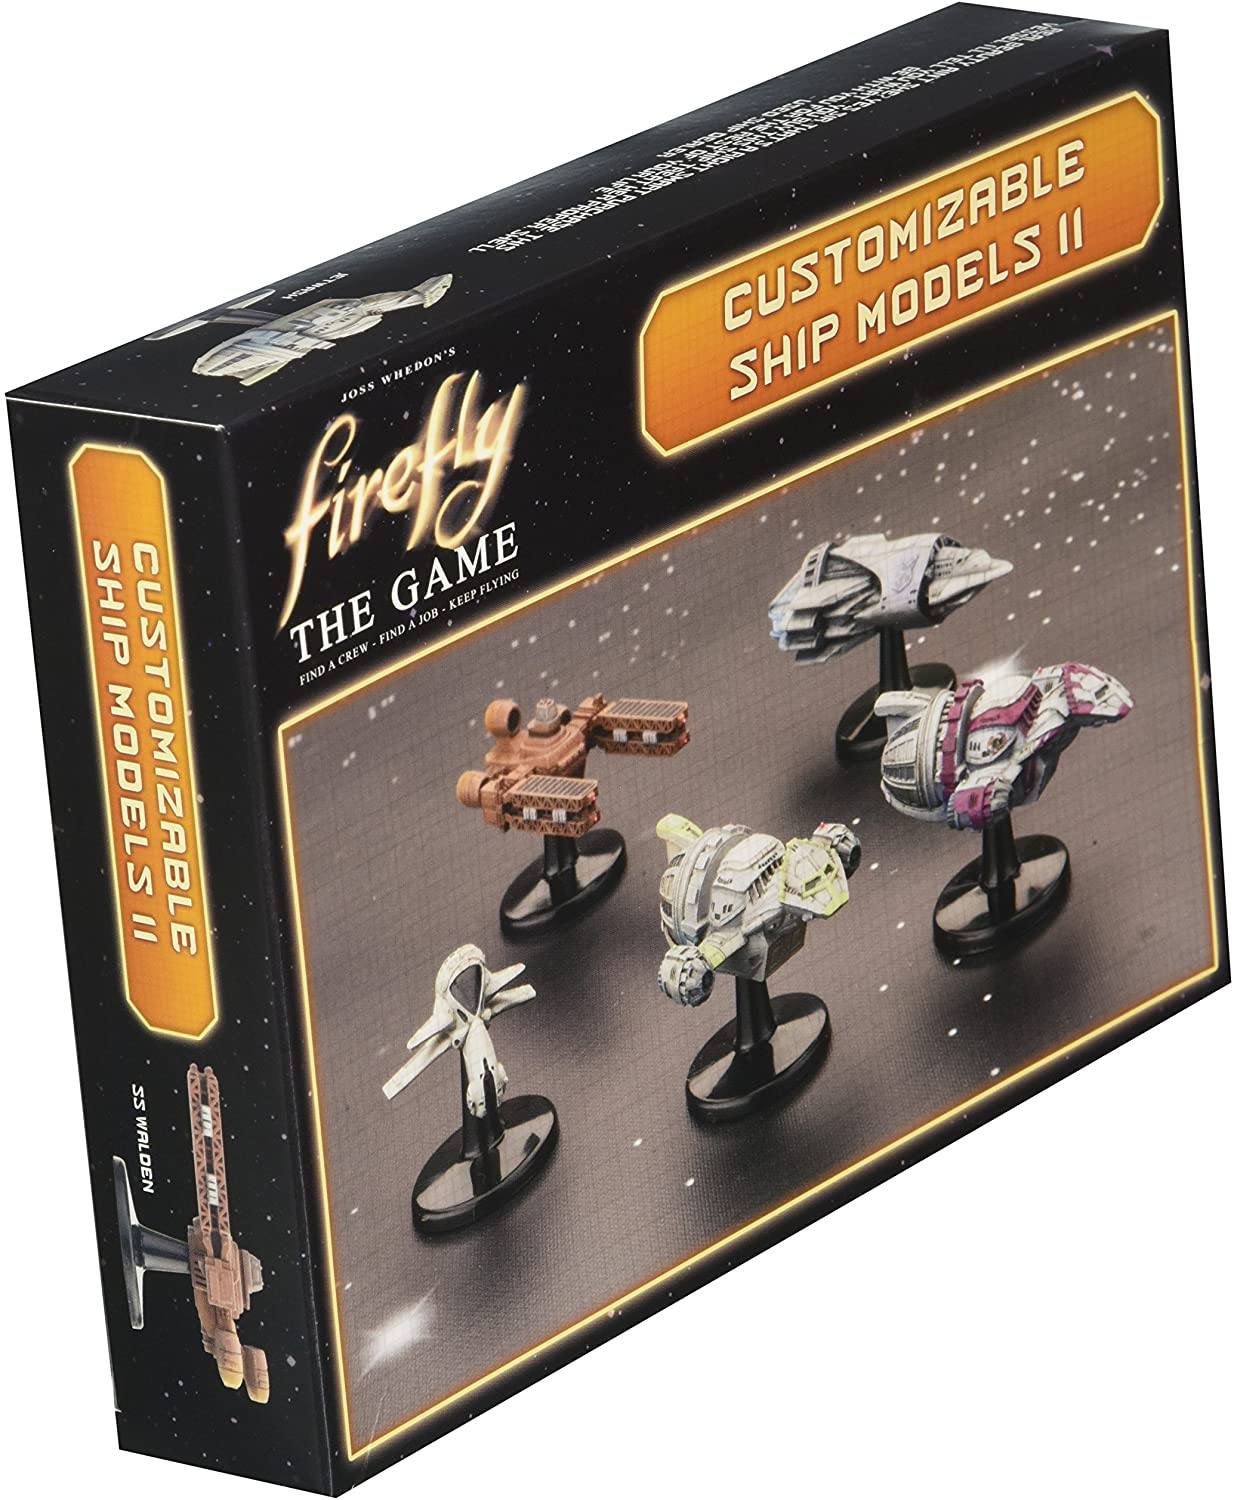 FireFly Customisable Ship Model II Board Game Gale Force 9 